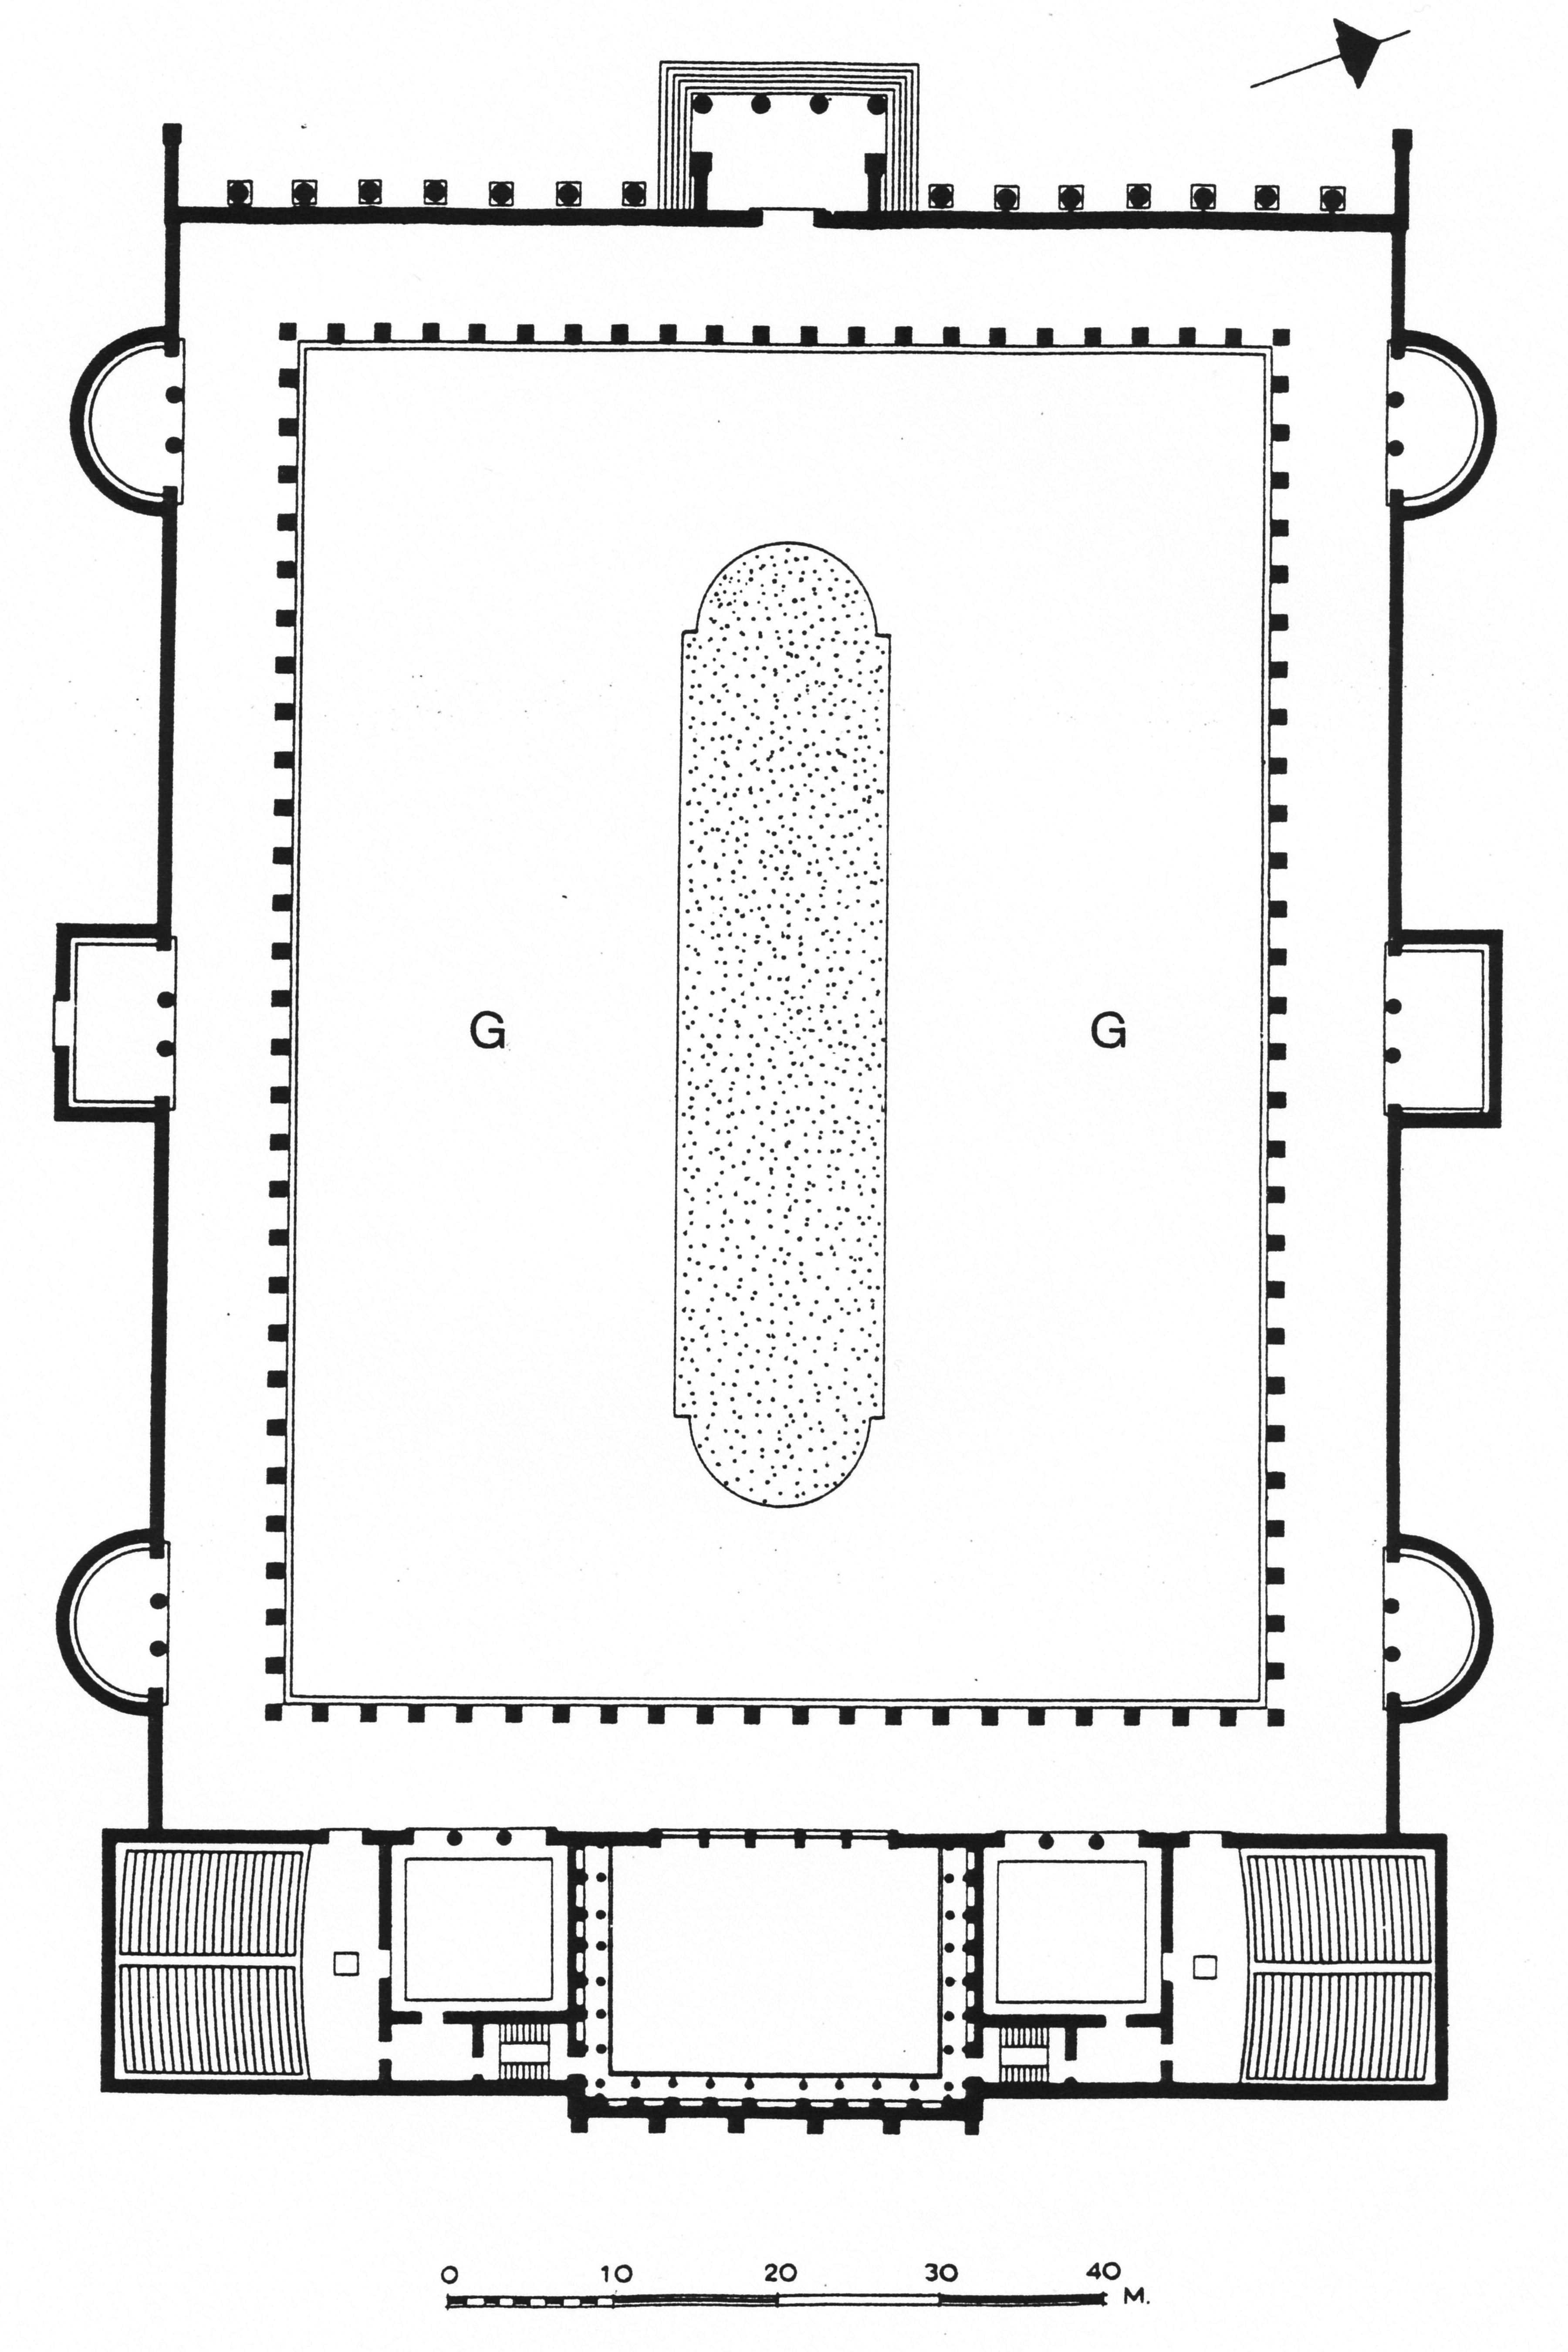 plan of the Library of Hadrian with courtyard garden and apsidal pool